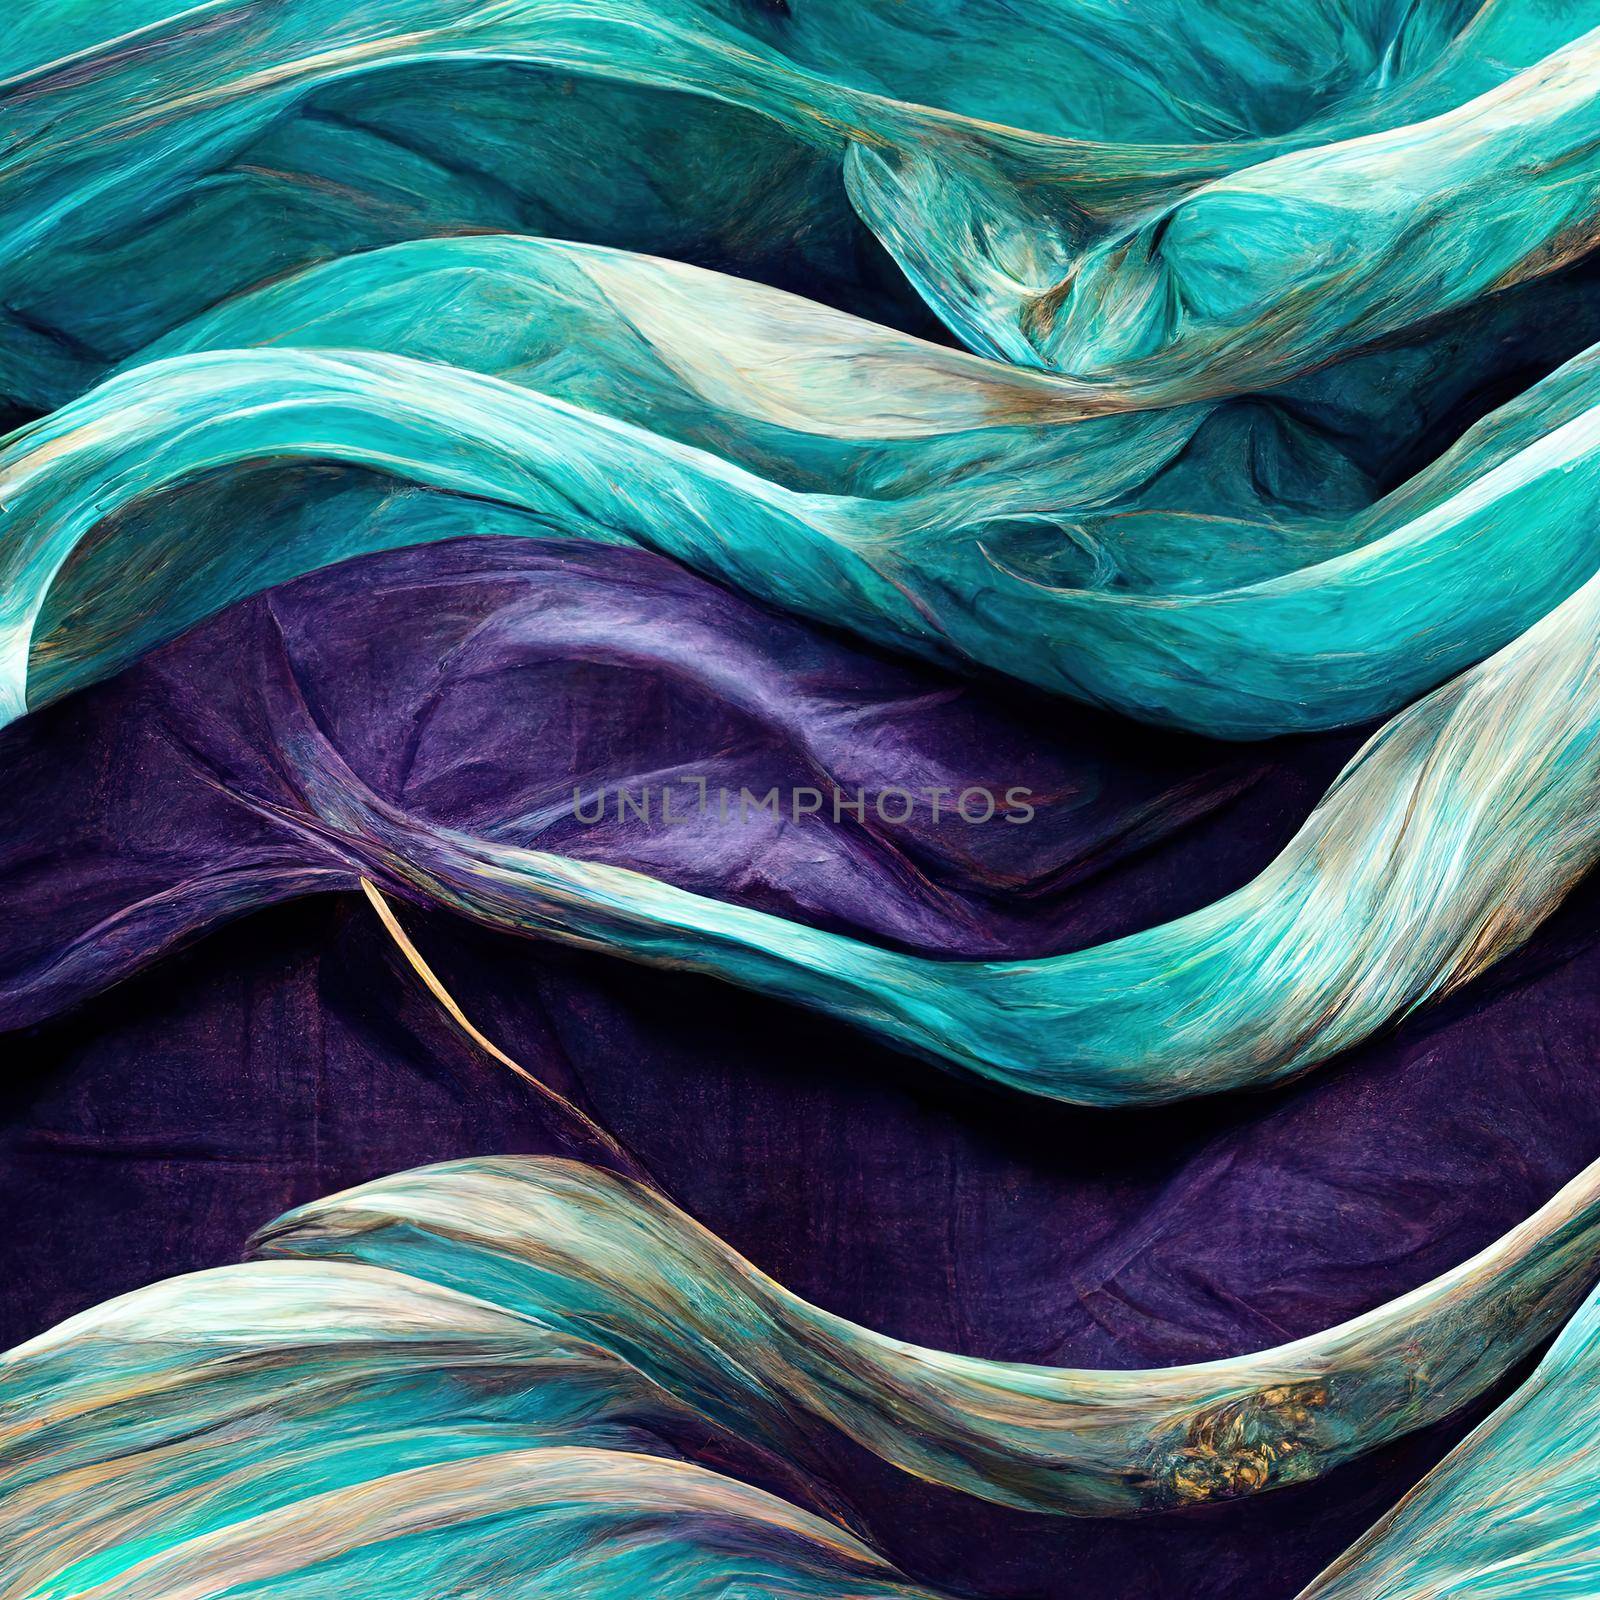 Lilac, Turquoise and Blue Colored Streaks form Abstract Swoosh Background by 2ragon